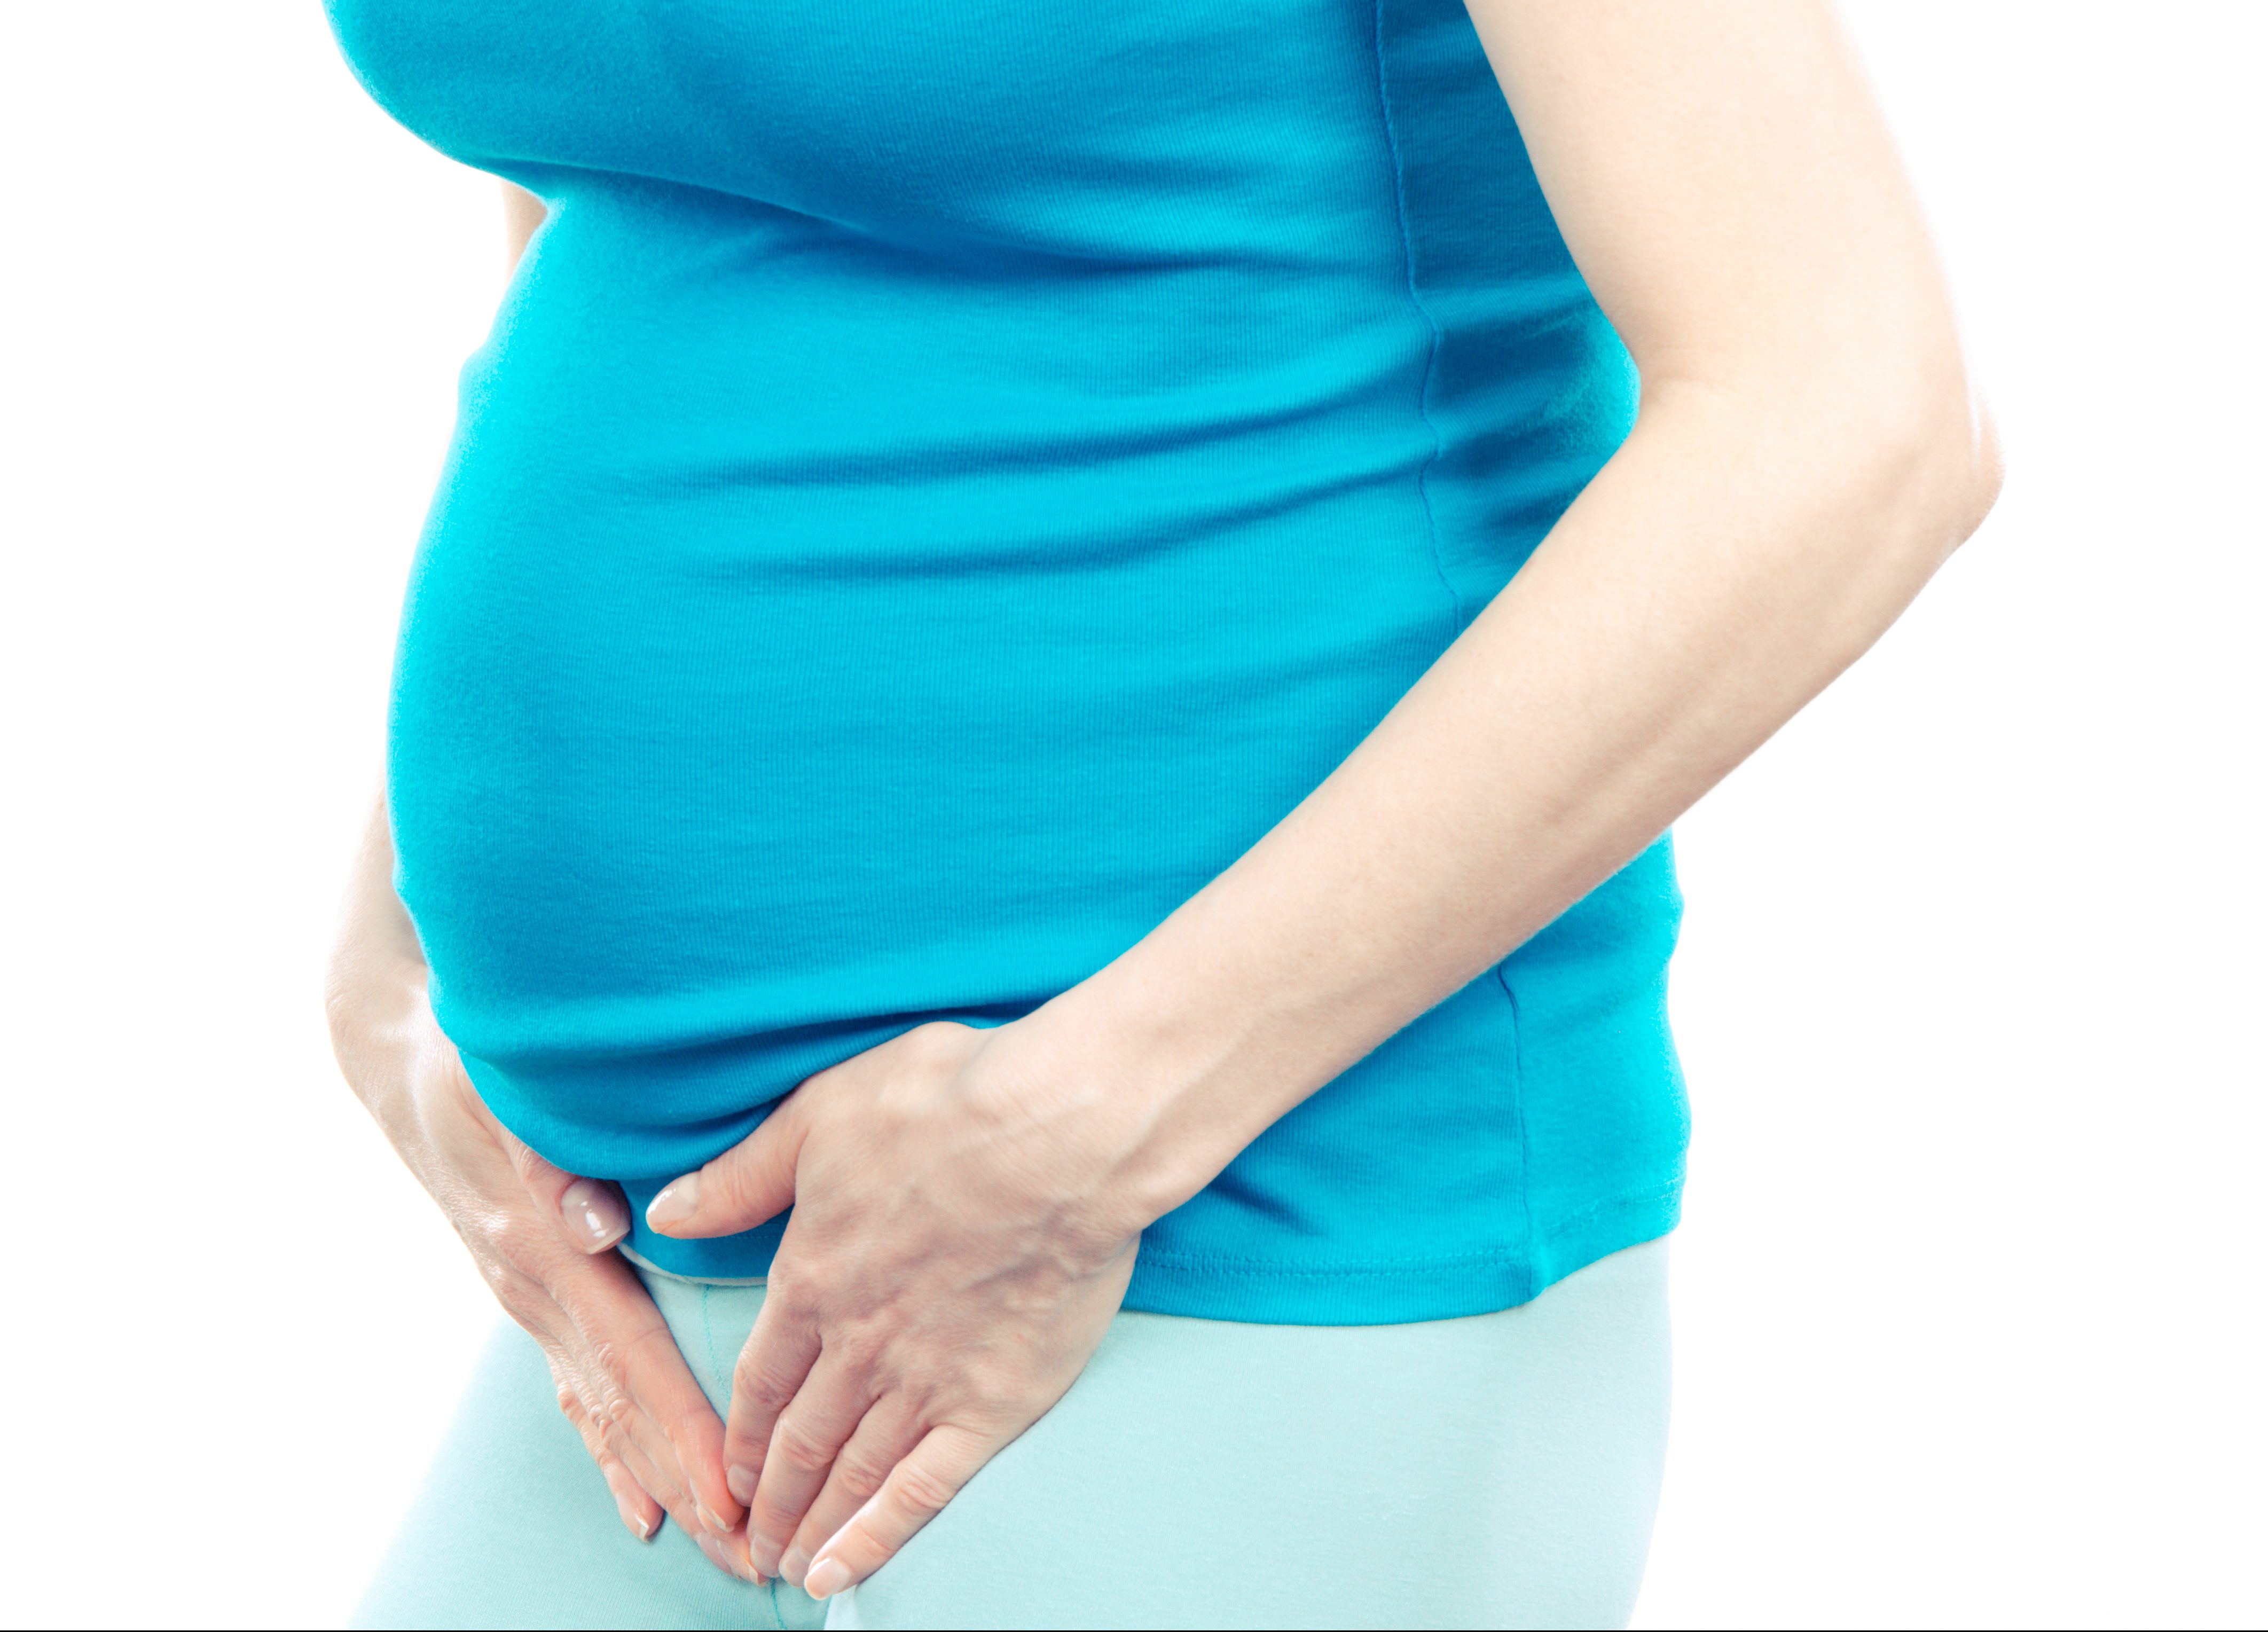 FUNIBER-pregnant-woman-with-hands-on-her-stomach-pregnancy-health-care-and-bladder-aches